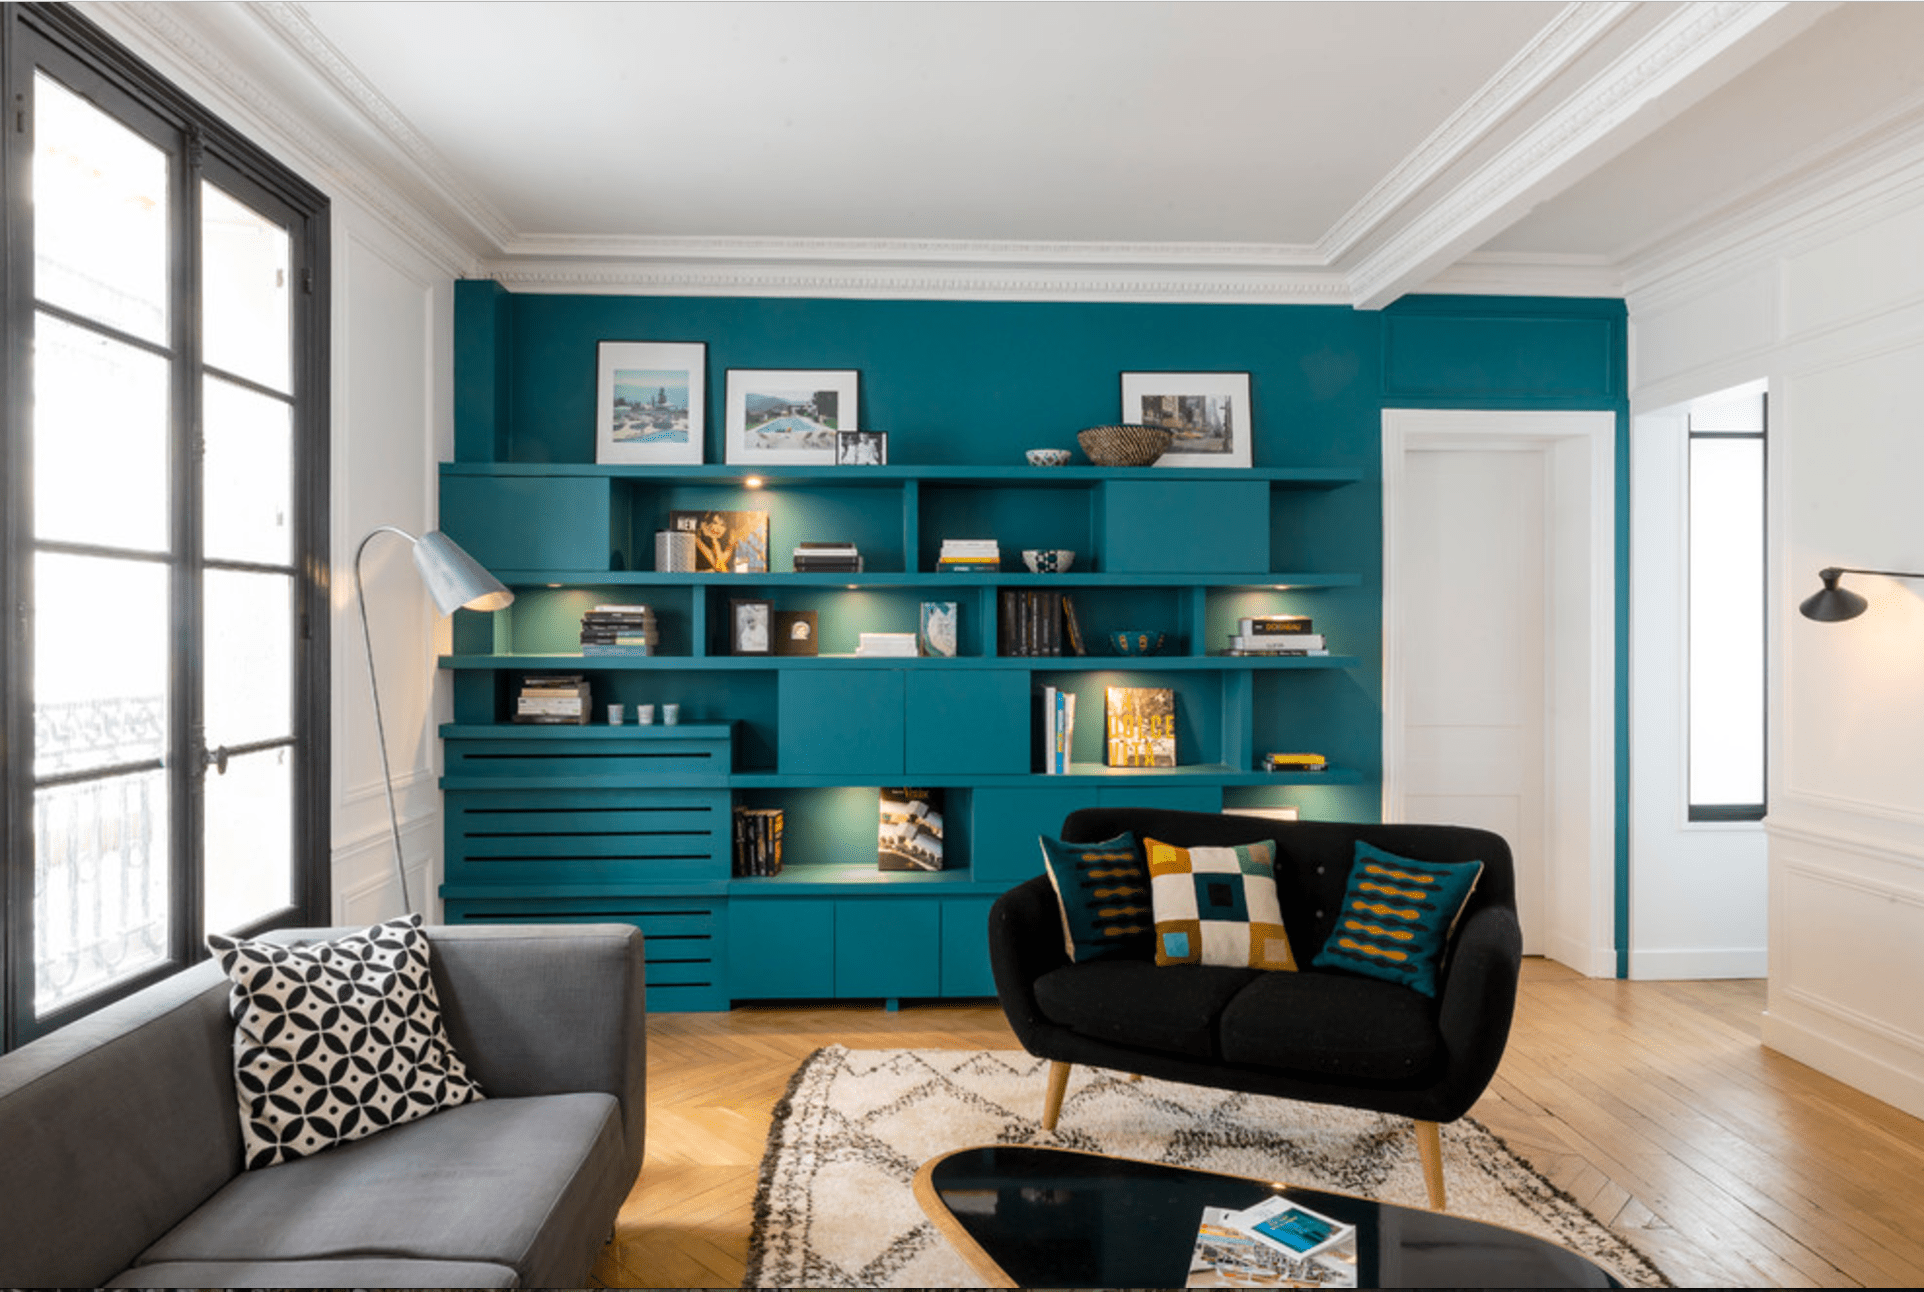 Accent Walls Guide Choosing the Right Colors & Walls to Paint